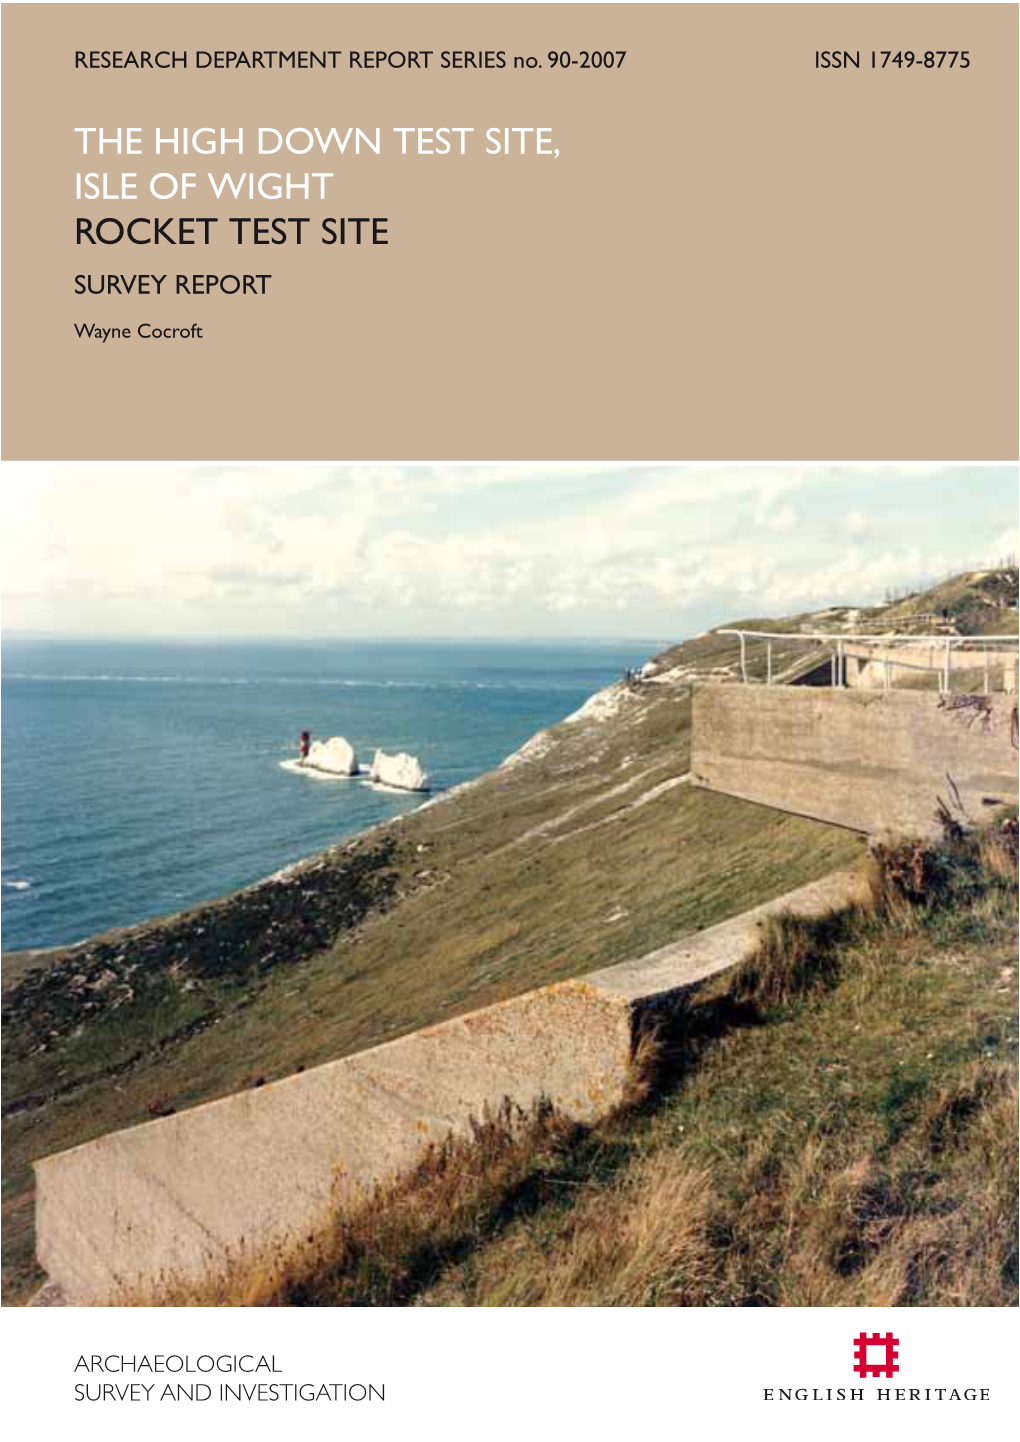 The High Down Test Site, Isle of Wight Rocket Test Site Survey Report